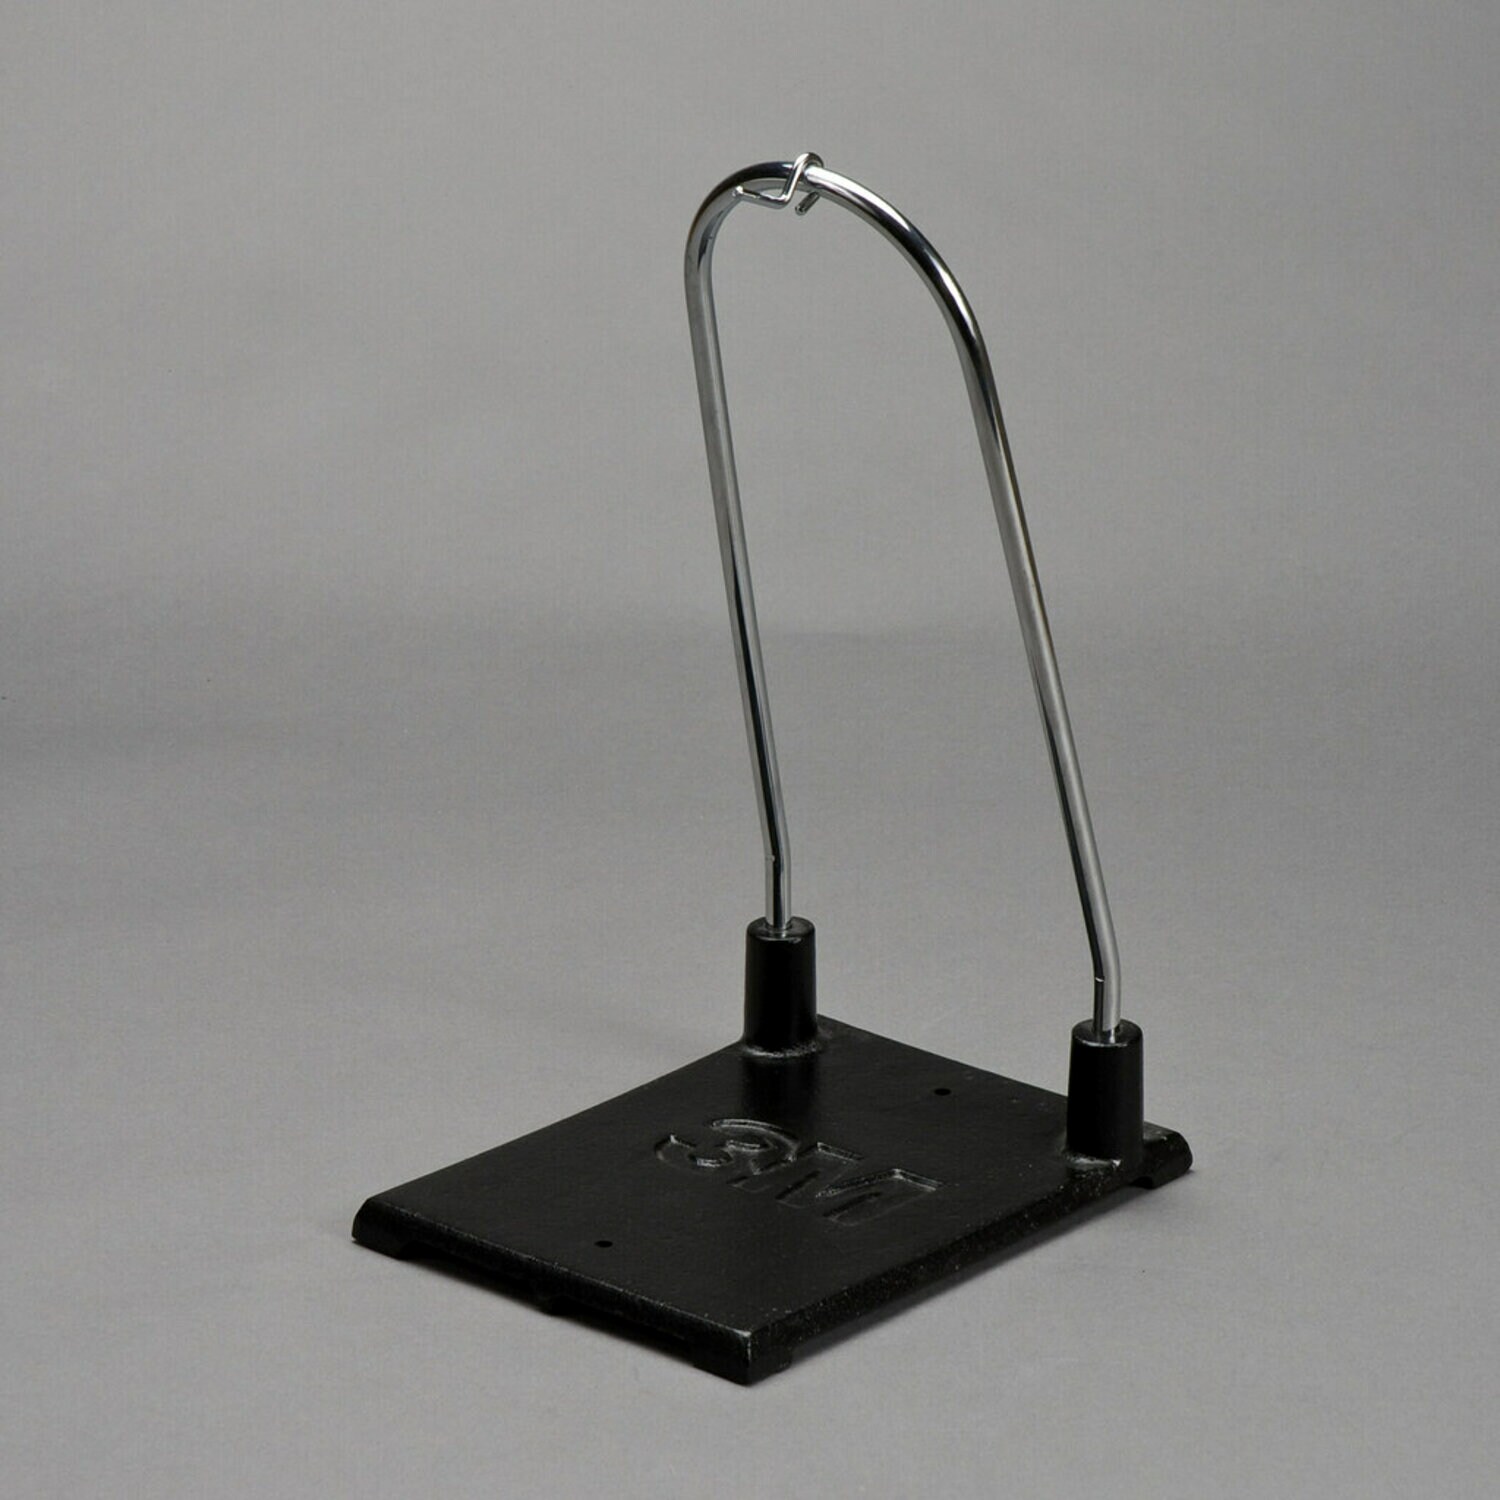 7000121618 - 3M Hot Melt Heavy Duty Benchstand 9945 for PG II and PG II LT, 1/case